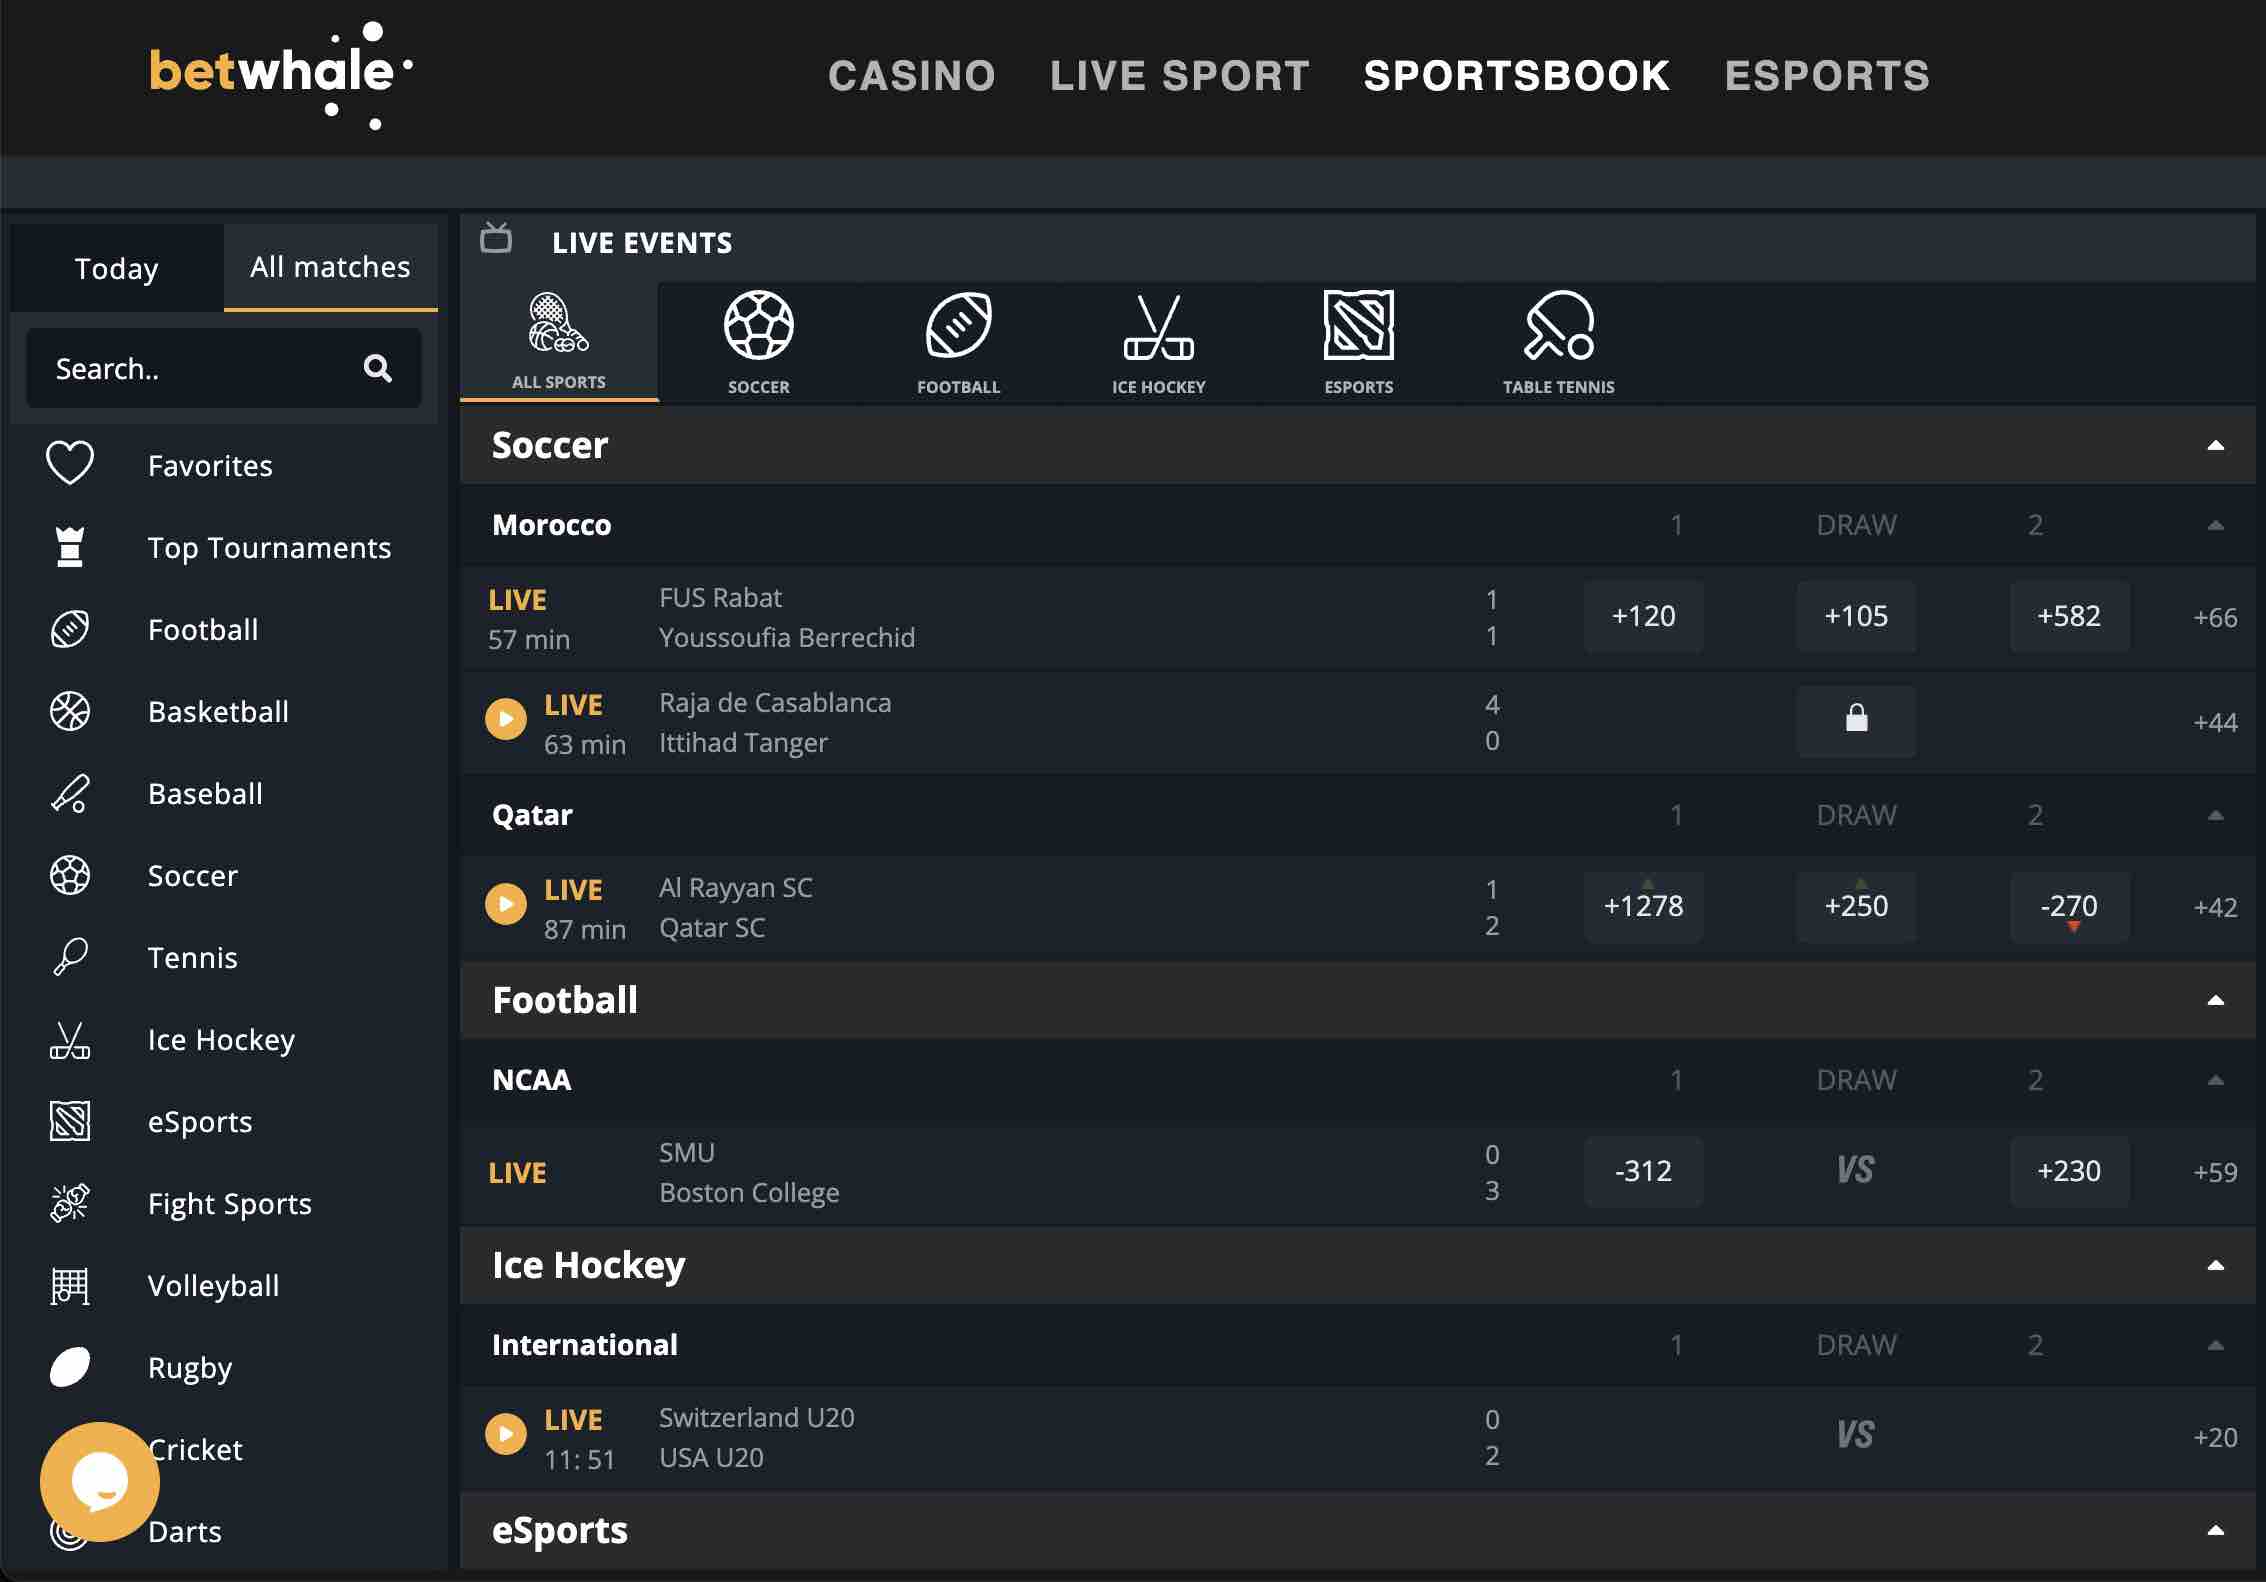 best WI online sports betting sites - a screenshot of the BetWhale sportsbook homepage